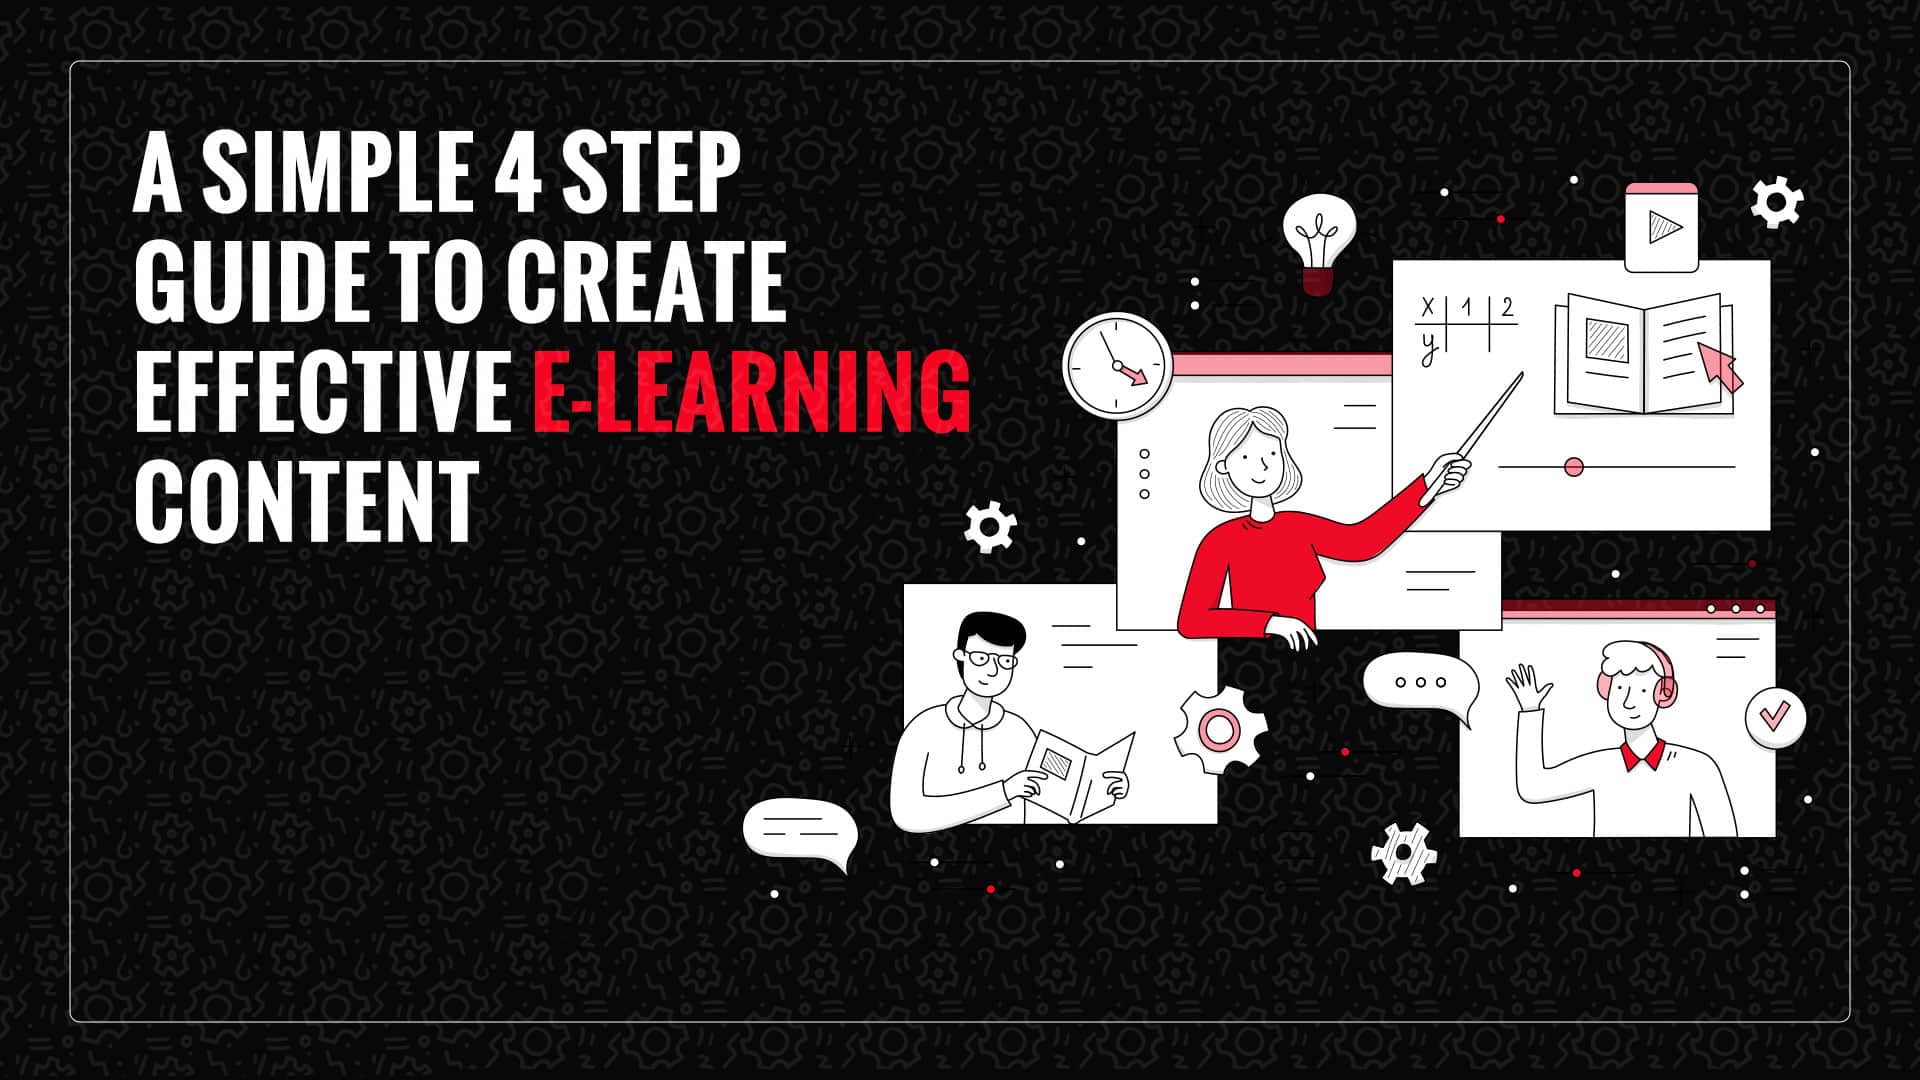 Creating your own e-learning content? Give this a read